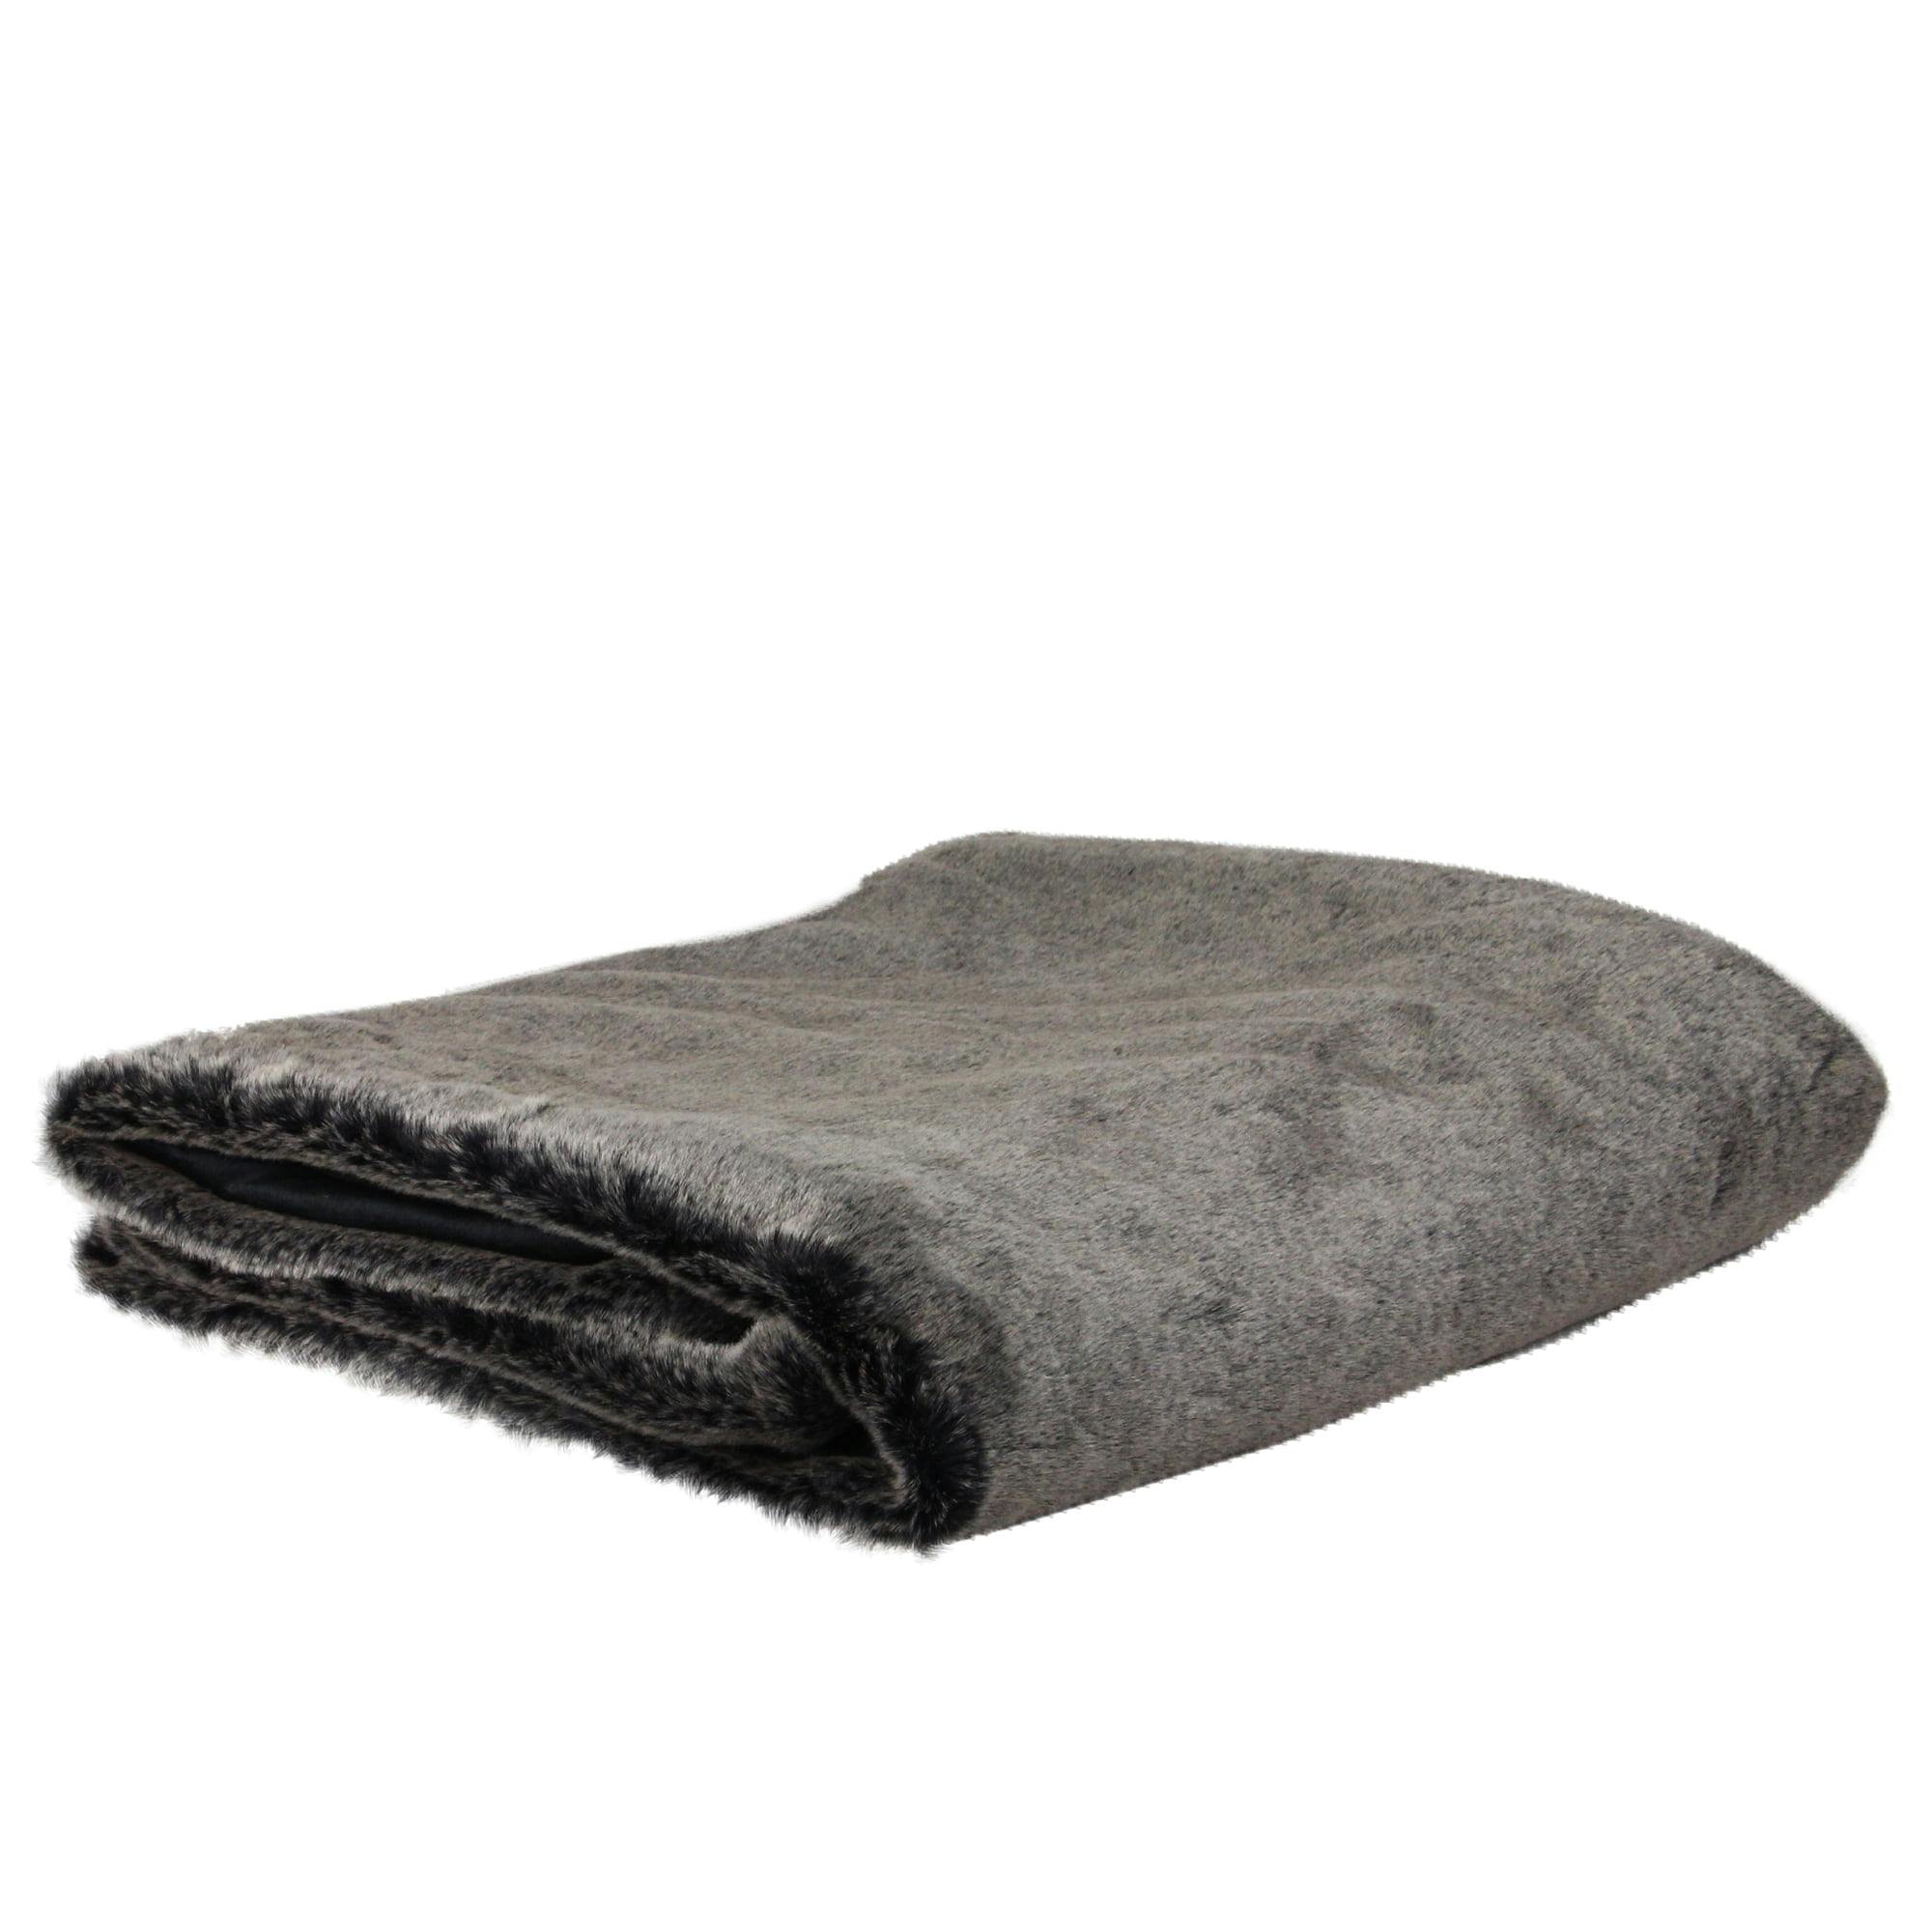 Charcoal Gray Luxurious Faux Fur 50" x 60" Throw Blanket